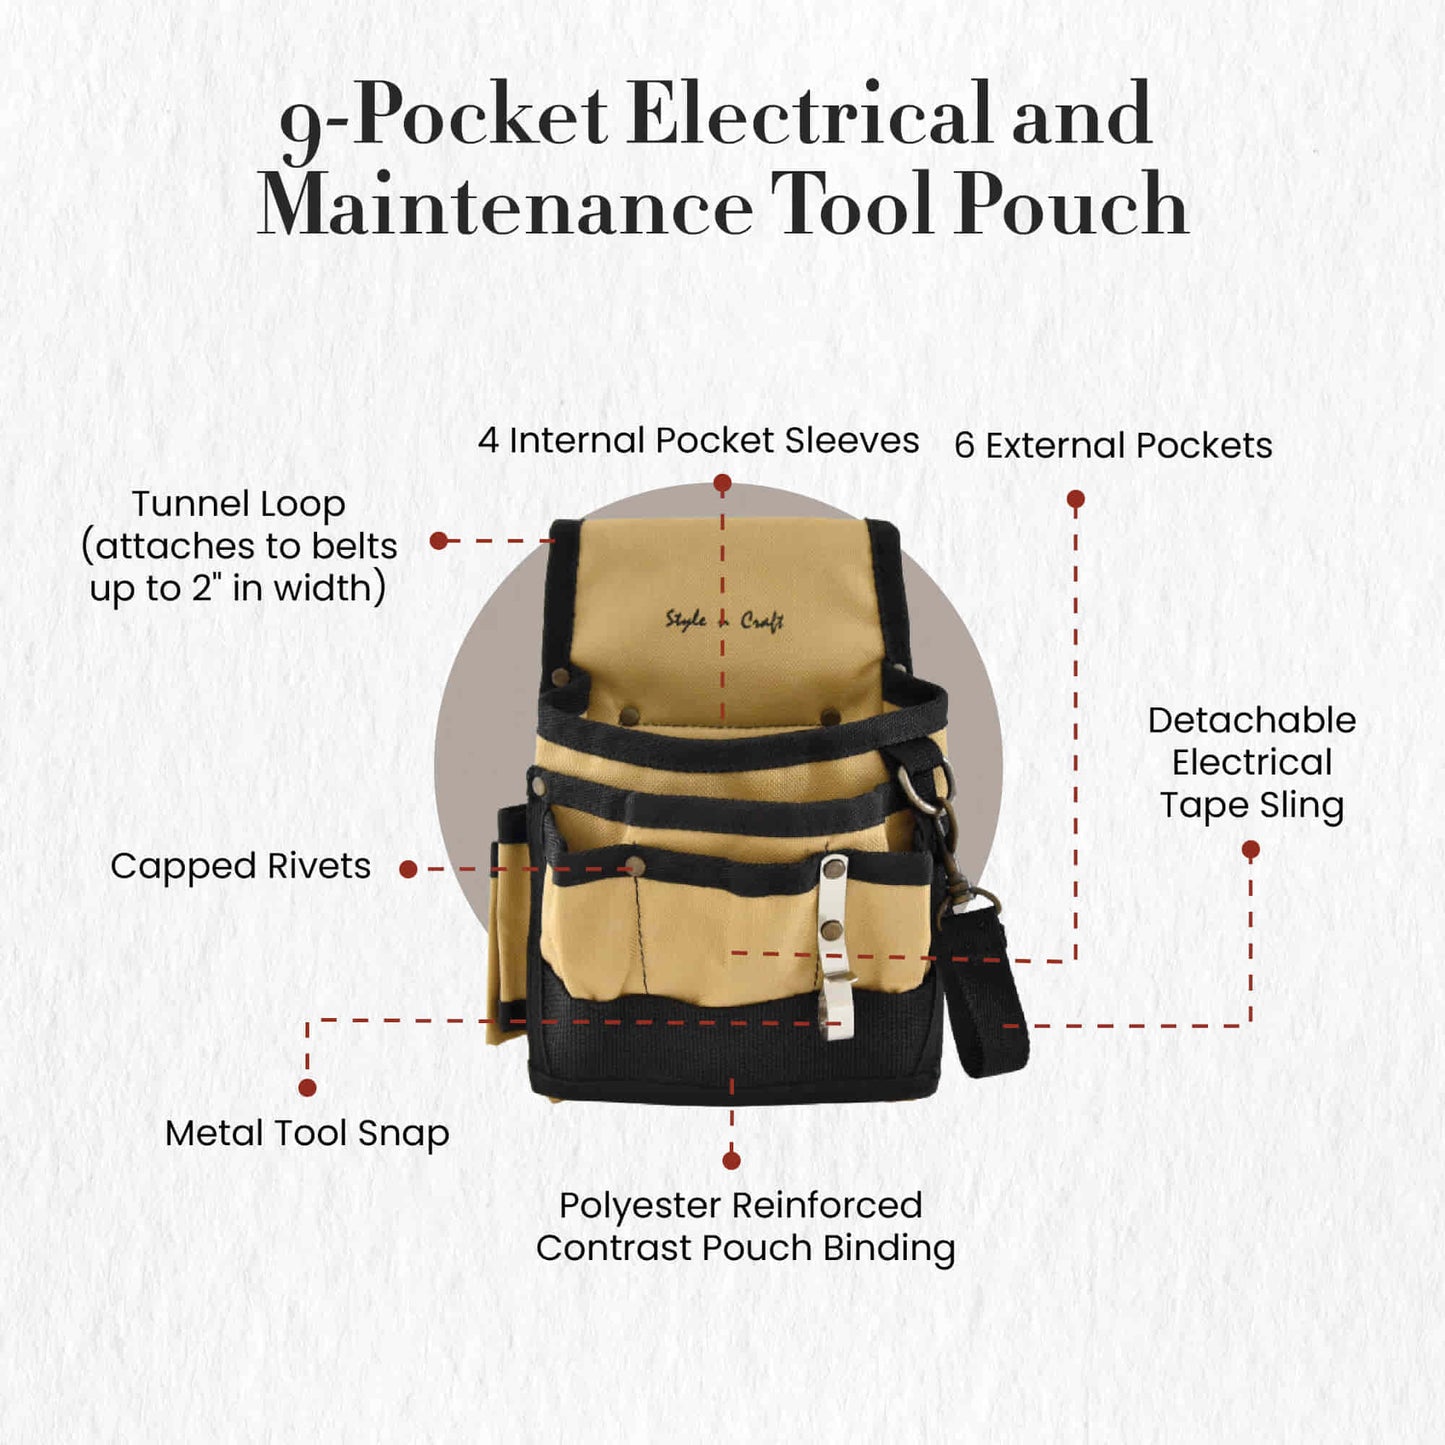 Style n Craft 76604 - 9 Pocket Electrical Maintenance Tool Pouch in 600D Polyester in Khaki & Black Combination - Front View Showing the Details